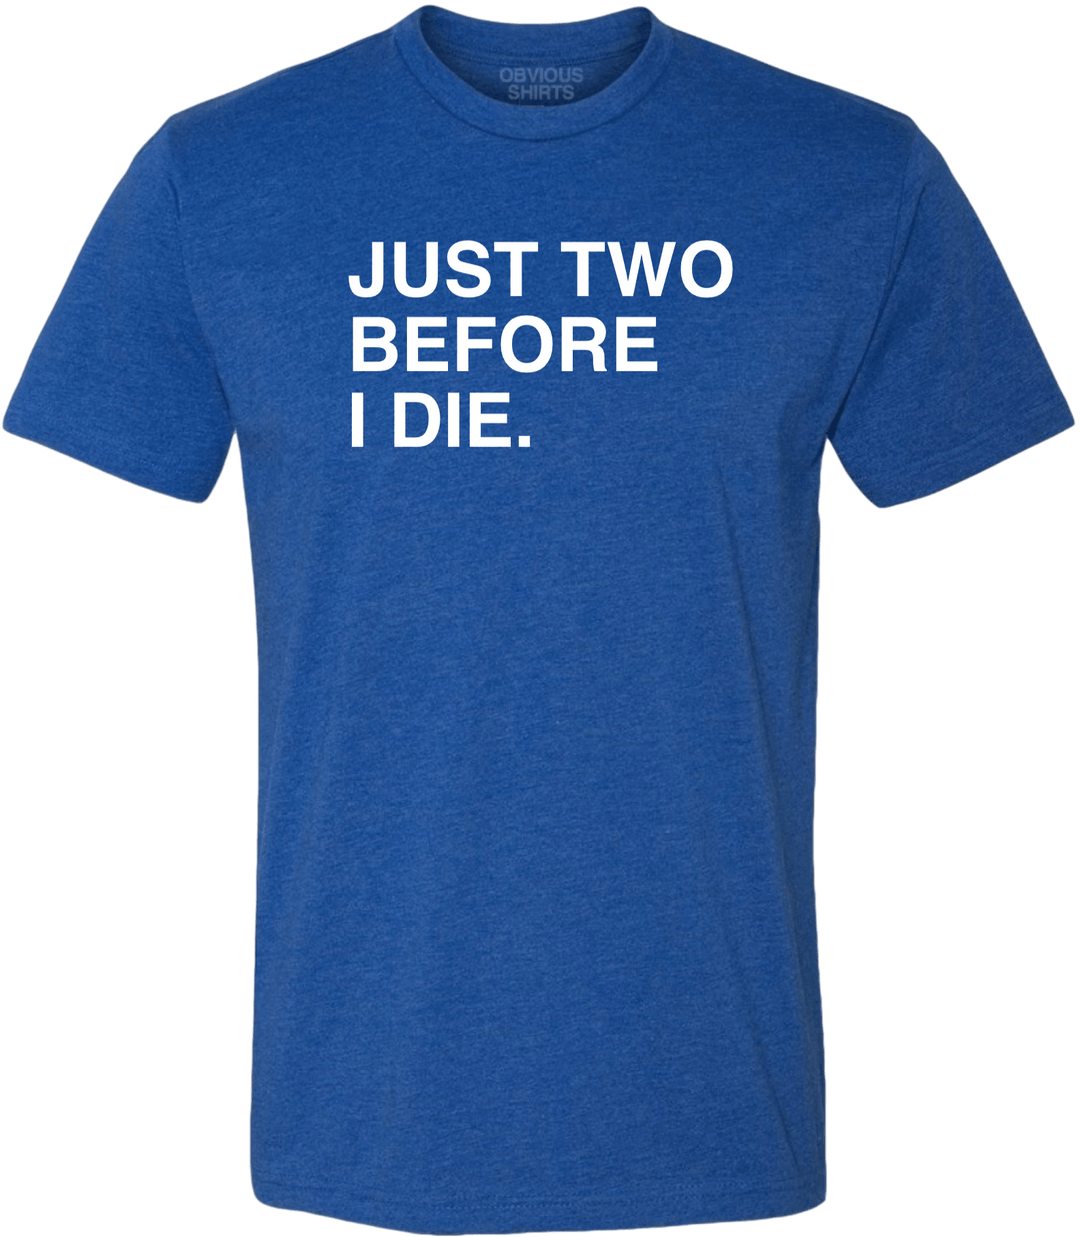 JUST TWO BEFORE I DIE. - OBVIOUS SHIRTS.